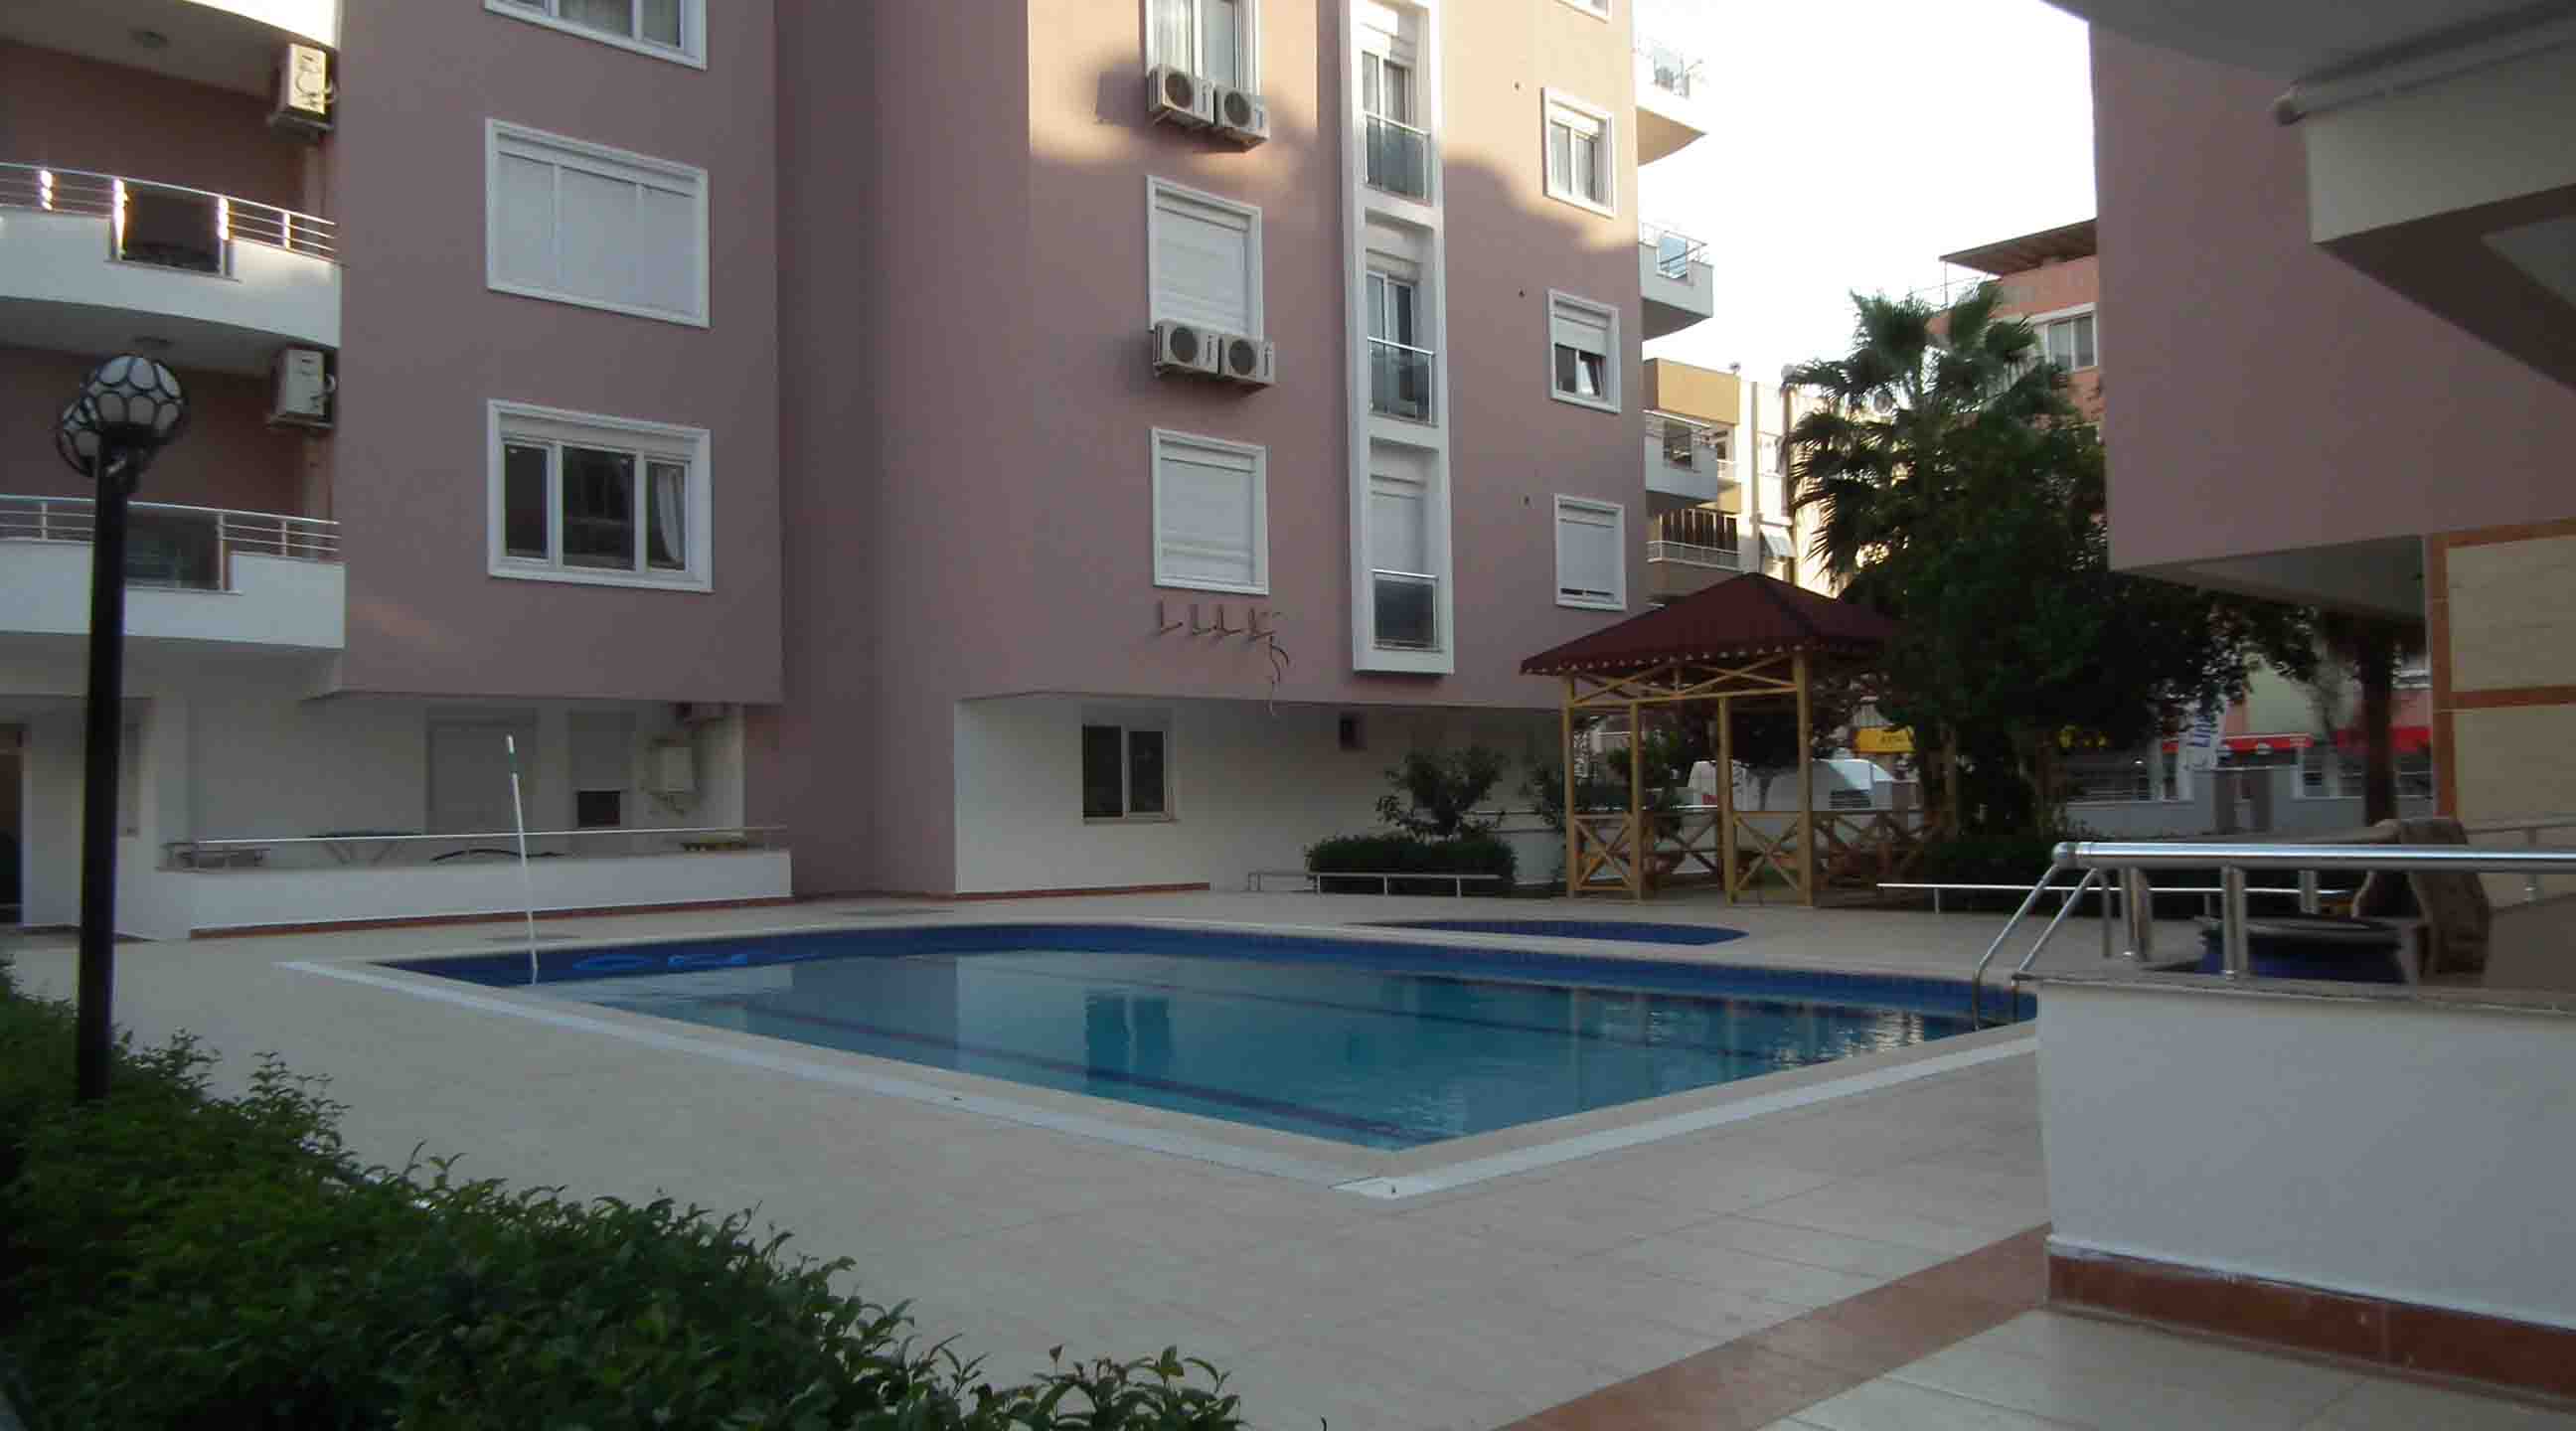 Real Estate House in Antalya Turkey for sale 3